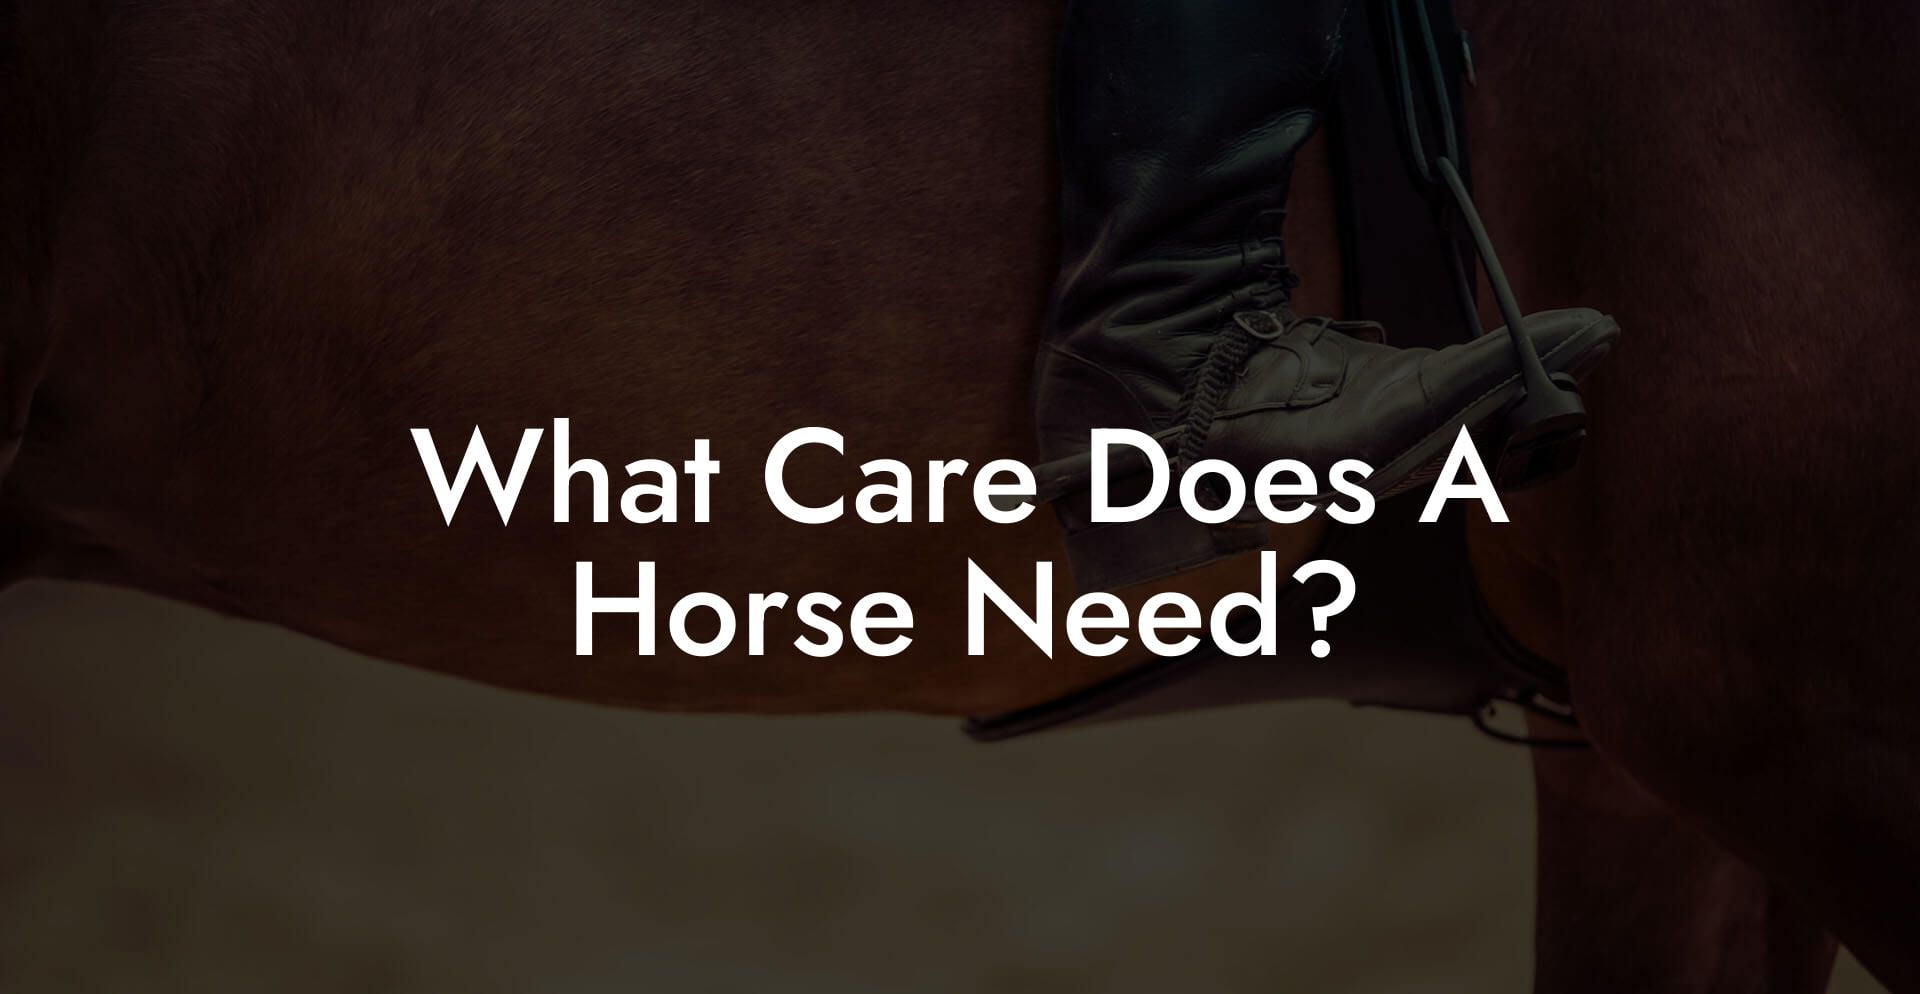 What Care Does A Horse Need?